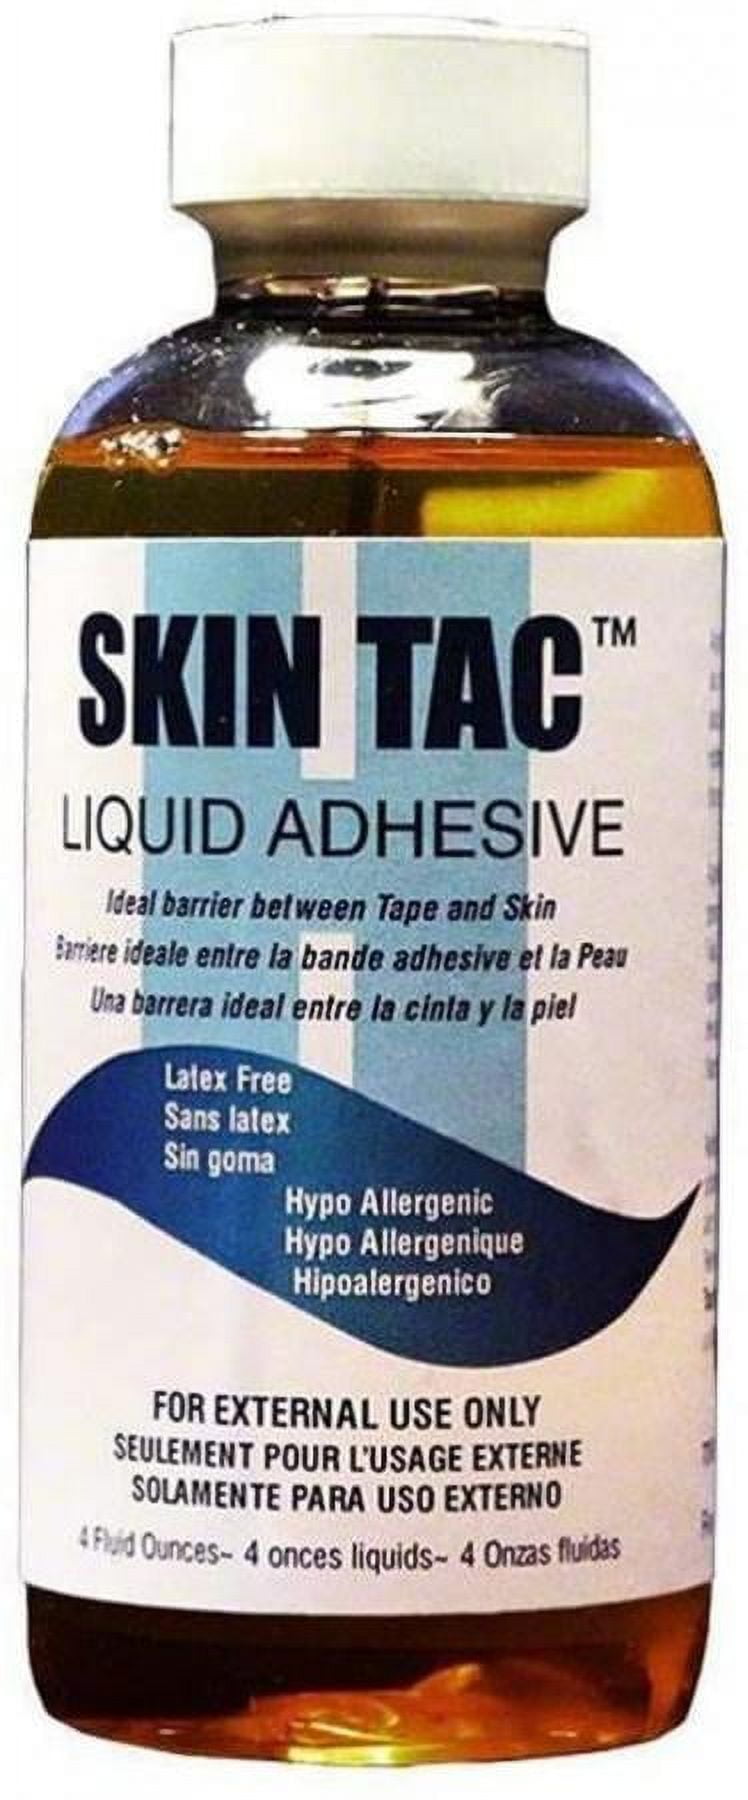 Skin Tac H Liquid Adhesive, 4 ounce Bottle, Clear, Latex-free, 1 Count